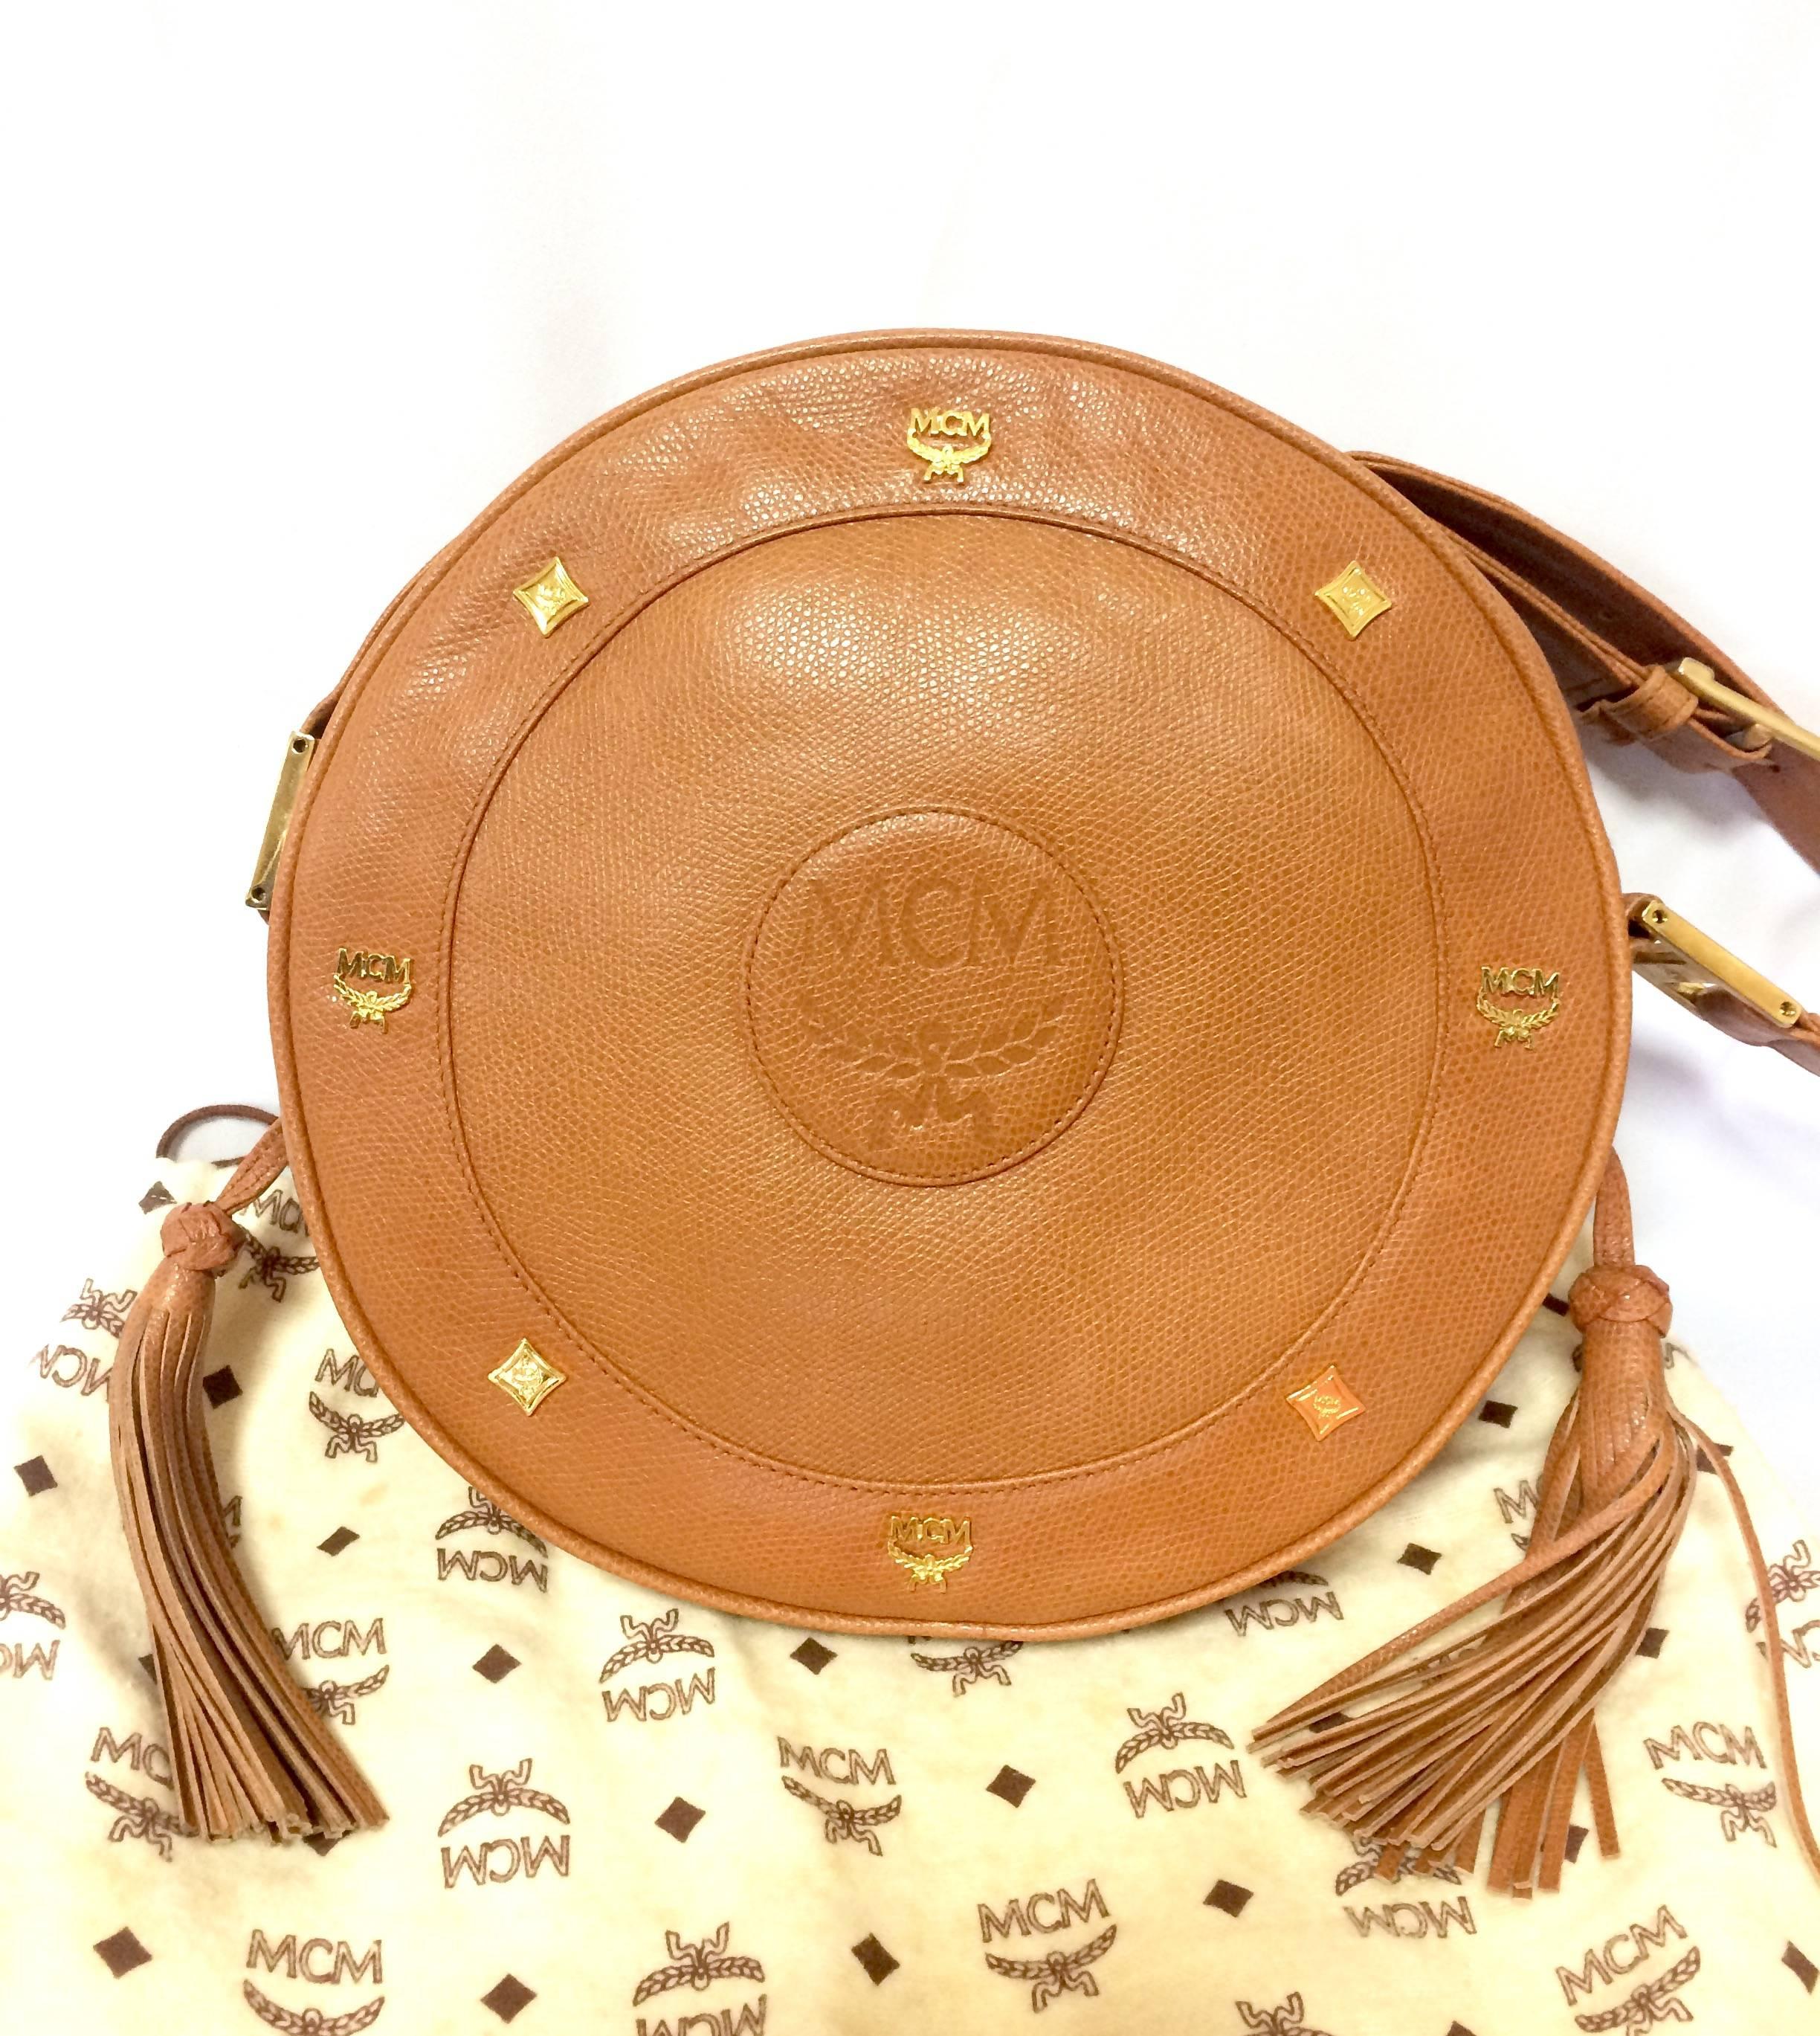 1990s. MINT. Vintage MCM brown grained leather round shoulder bag with golden logo studs and fringes. Suzy Wong shoulder bag. Unisex purse Designed by Michael Cromer.

MCM has been back in the fashion trend again!!
Now it's considered to be one of